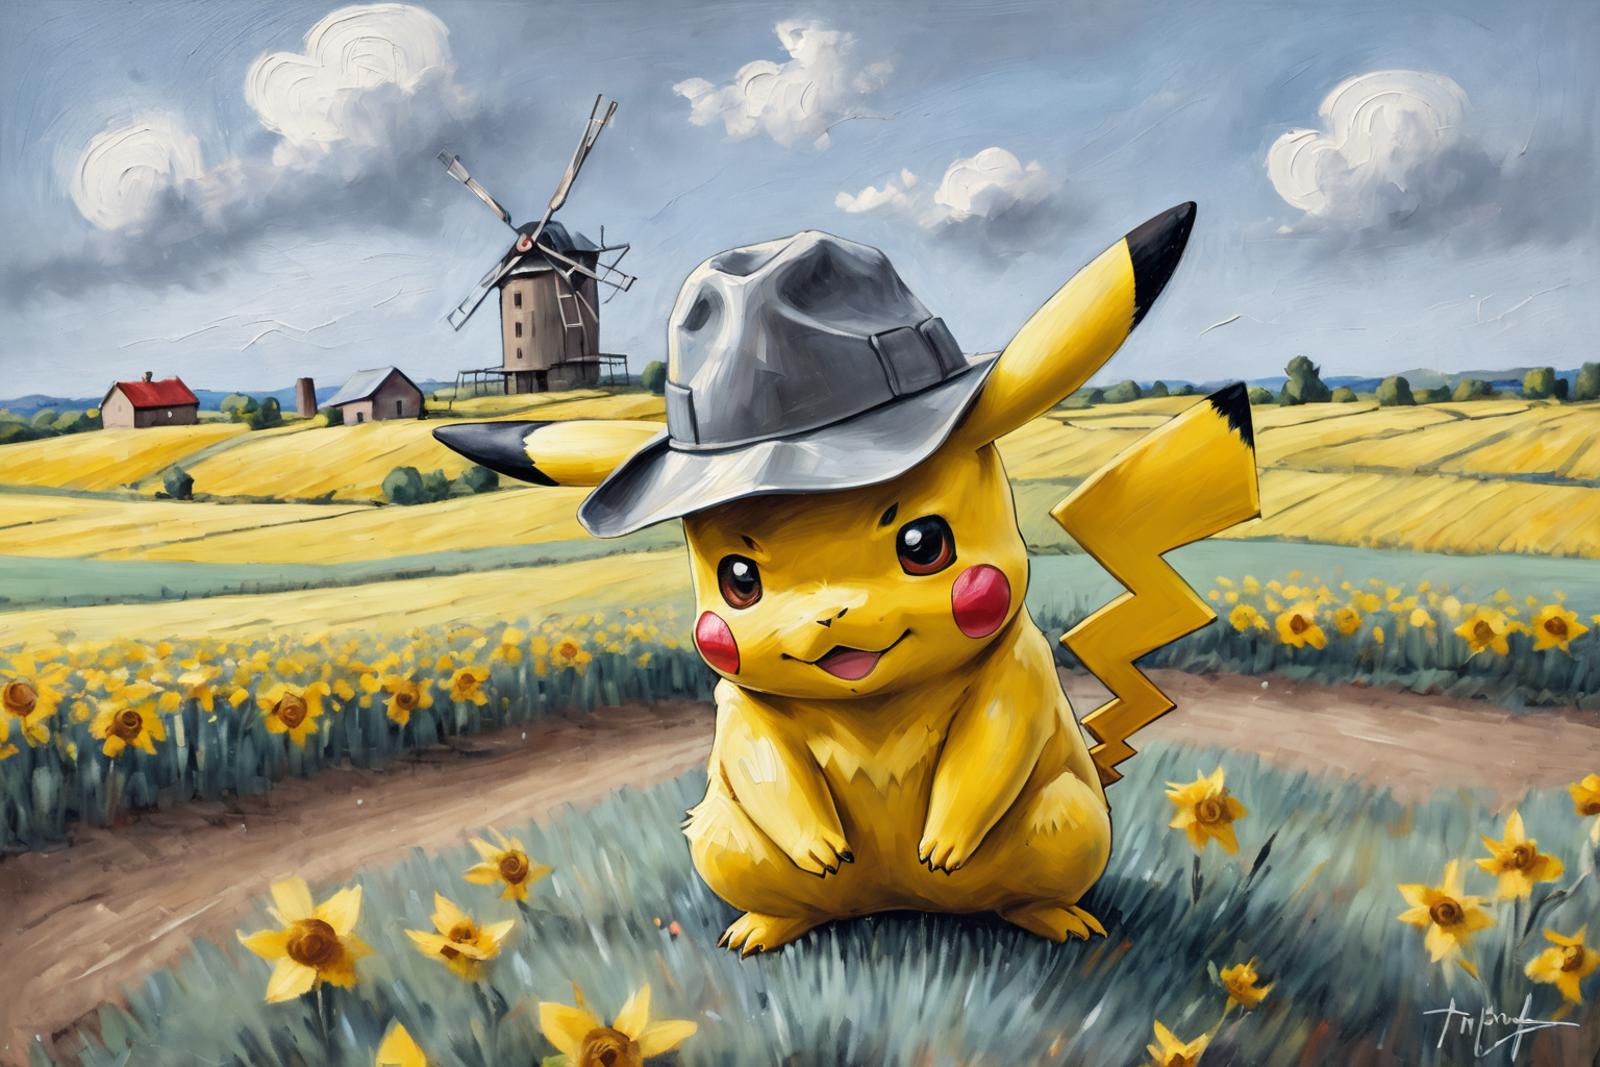 A colorful painting of a Pokemon character wearing a hat.